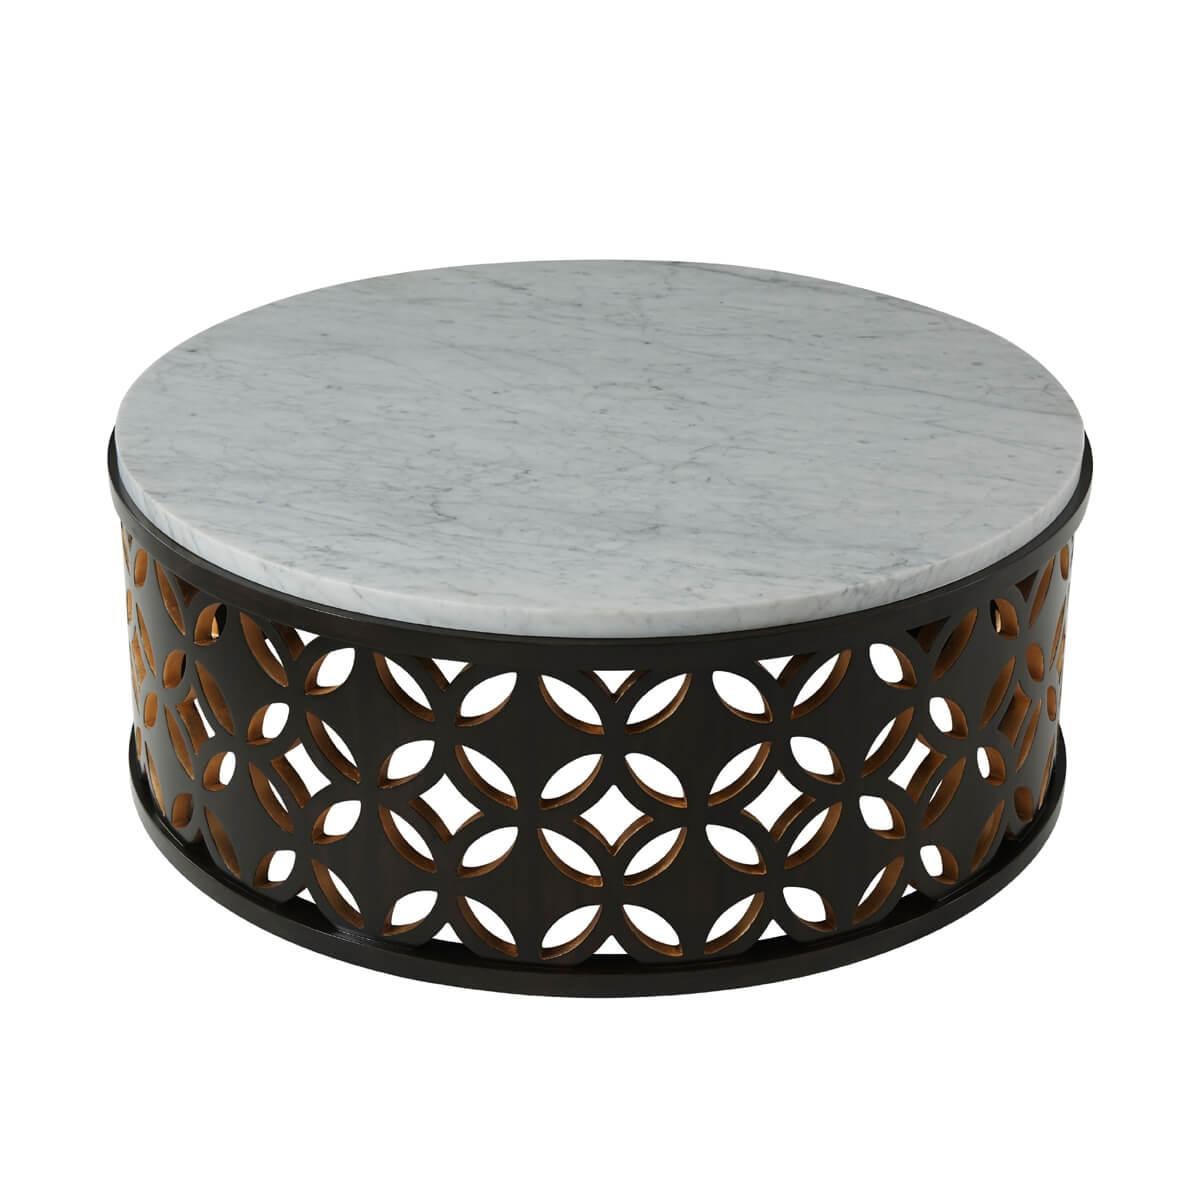 With an intricately designed reticulated wooden openwork base with gold leaf details supporting a round white bianco carara marble top.

Dimensions: 43.25